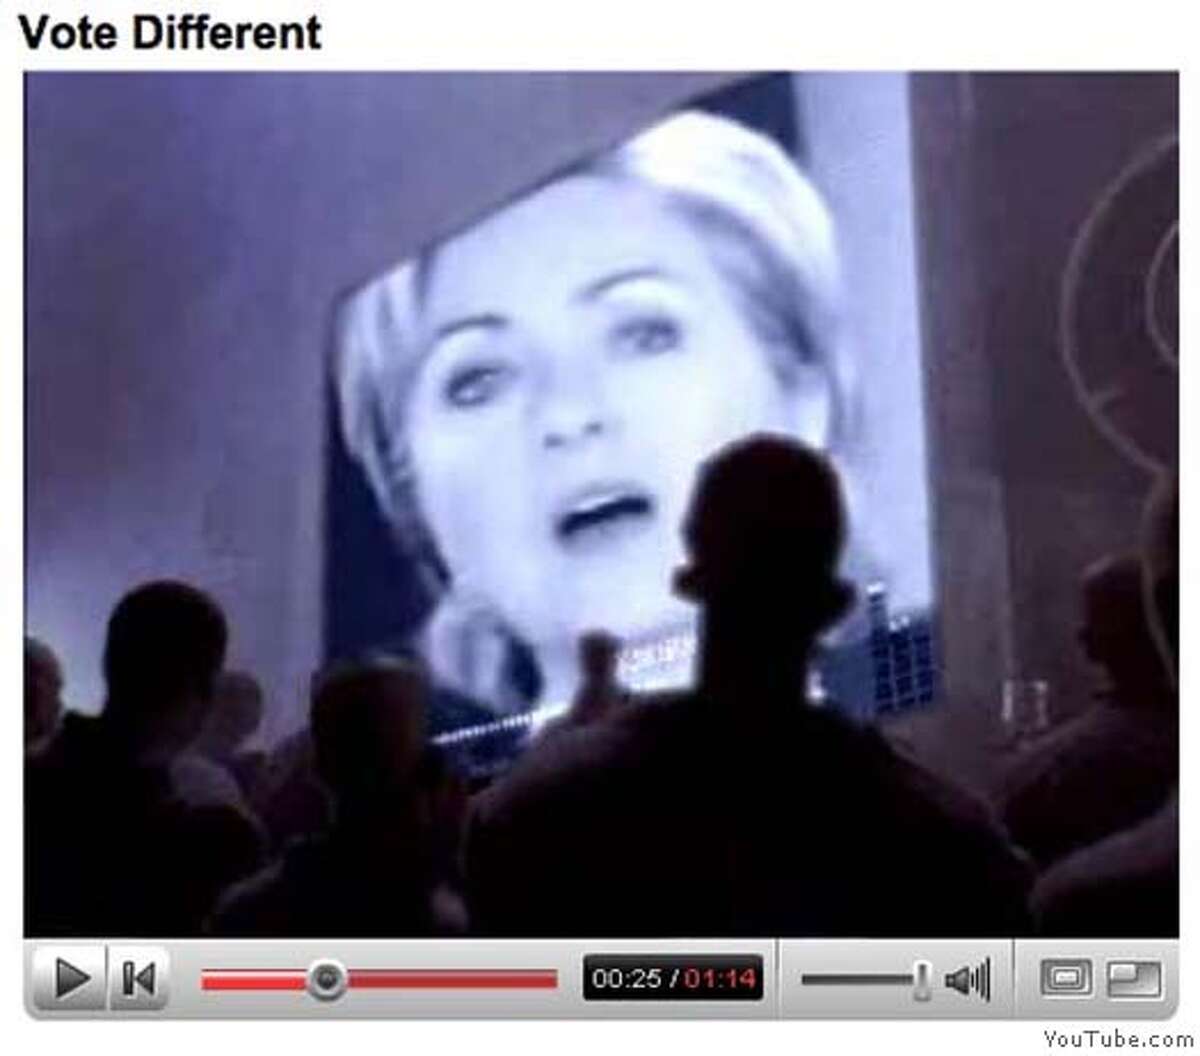 Frame grab from YouTube.com showing the "Hillary 1984" video, which transforms an old Apple TV commercial into an ad touting Barack Obama's presidential campaign. COURTESY YOUTUBE Ran on: 03-20-2007 Images from YouTube.com show the Hillary 1984 video, which transforms an old Apple TV commercial introducing the Macintosh computer during the 1984 Super Bowl into an ad touting Barack Obamas campaign. Ran on: 03-20-2007 Images from YouTube.com show the Hillary 1984 video, which transforms an old Apple TV commercial introducing the Macintosh computer during the 1984 Super Bowl into an ad touting Barack Obamas campaign.